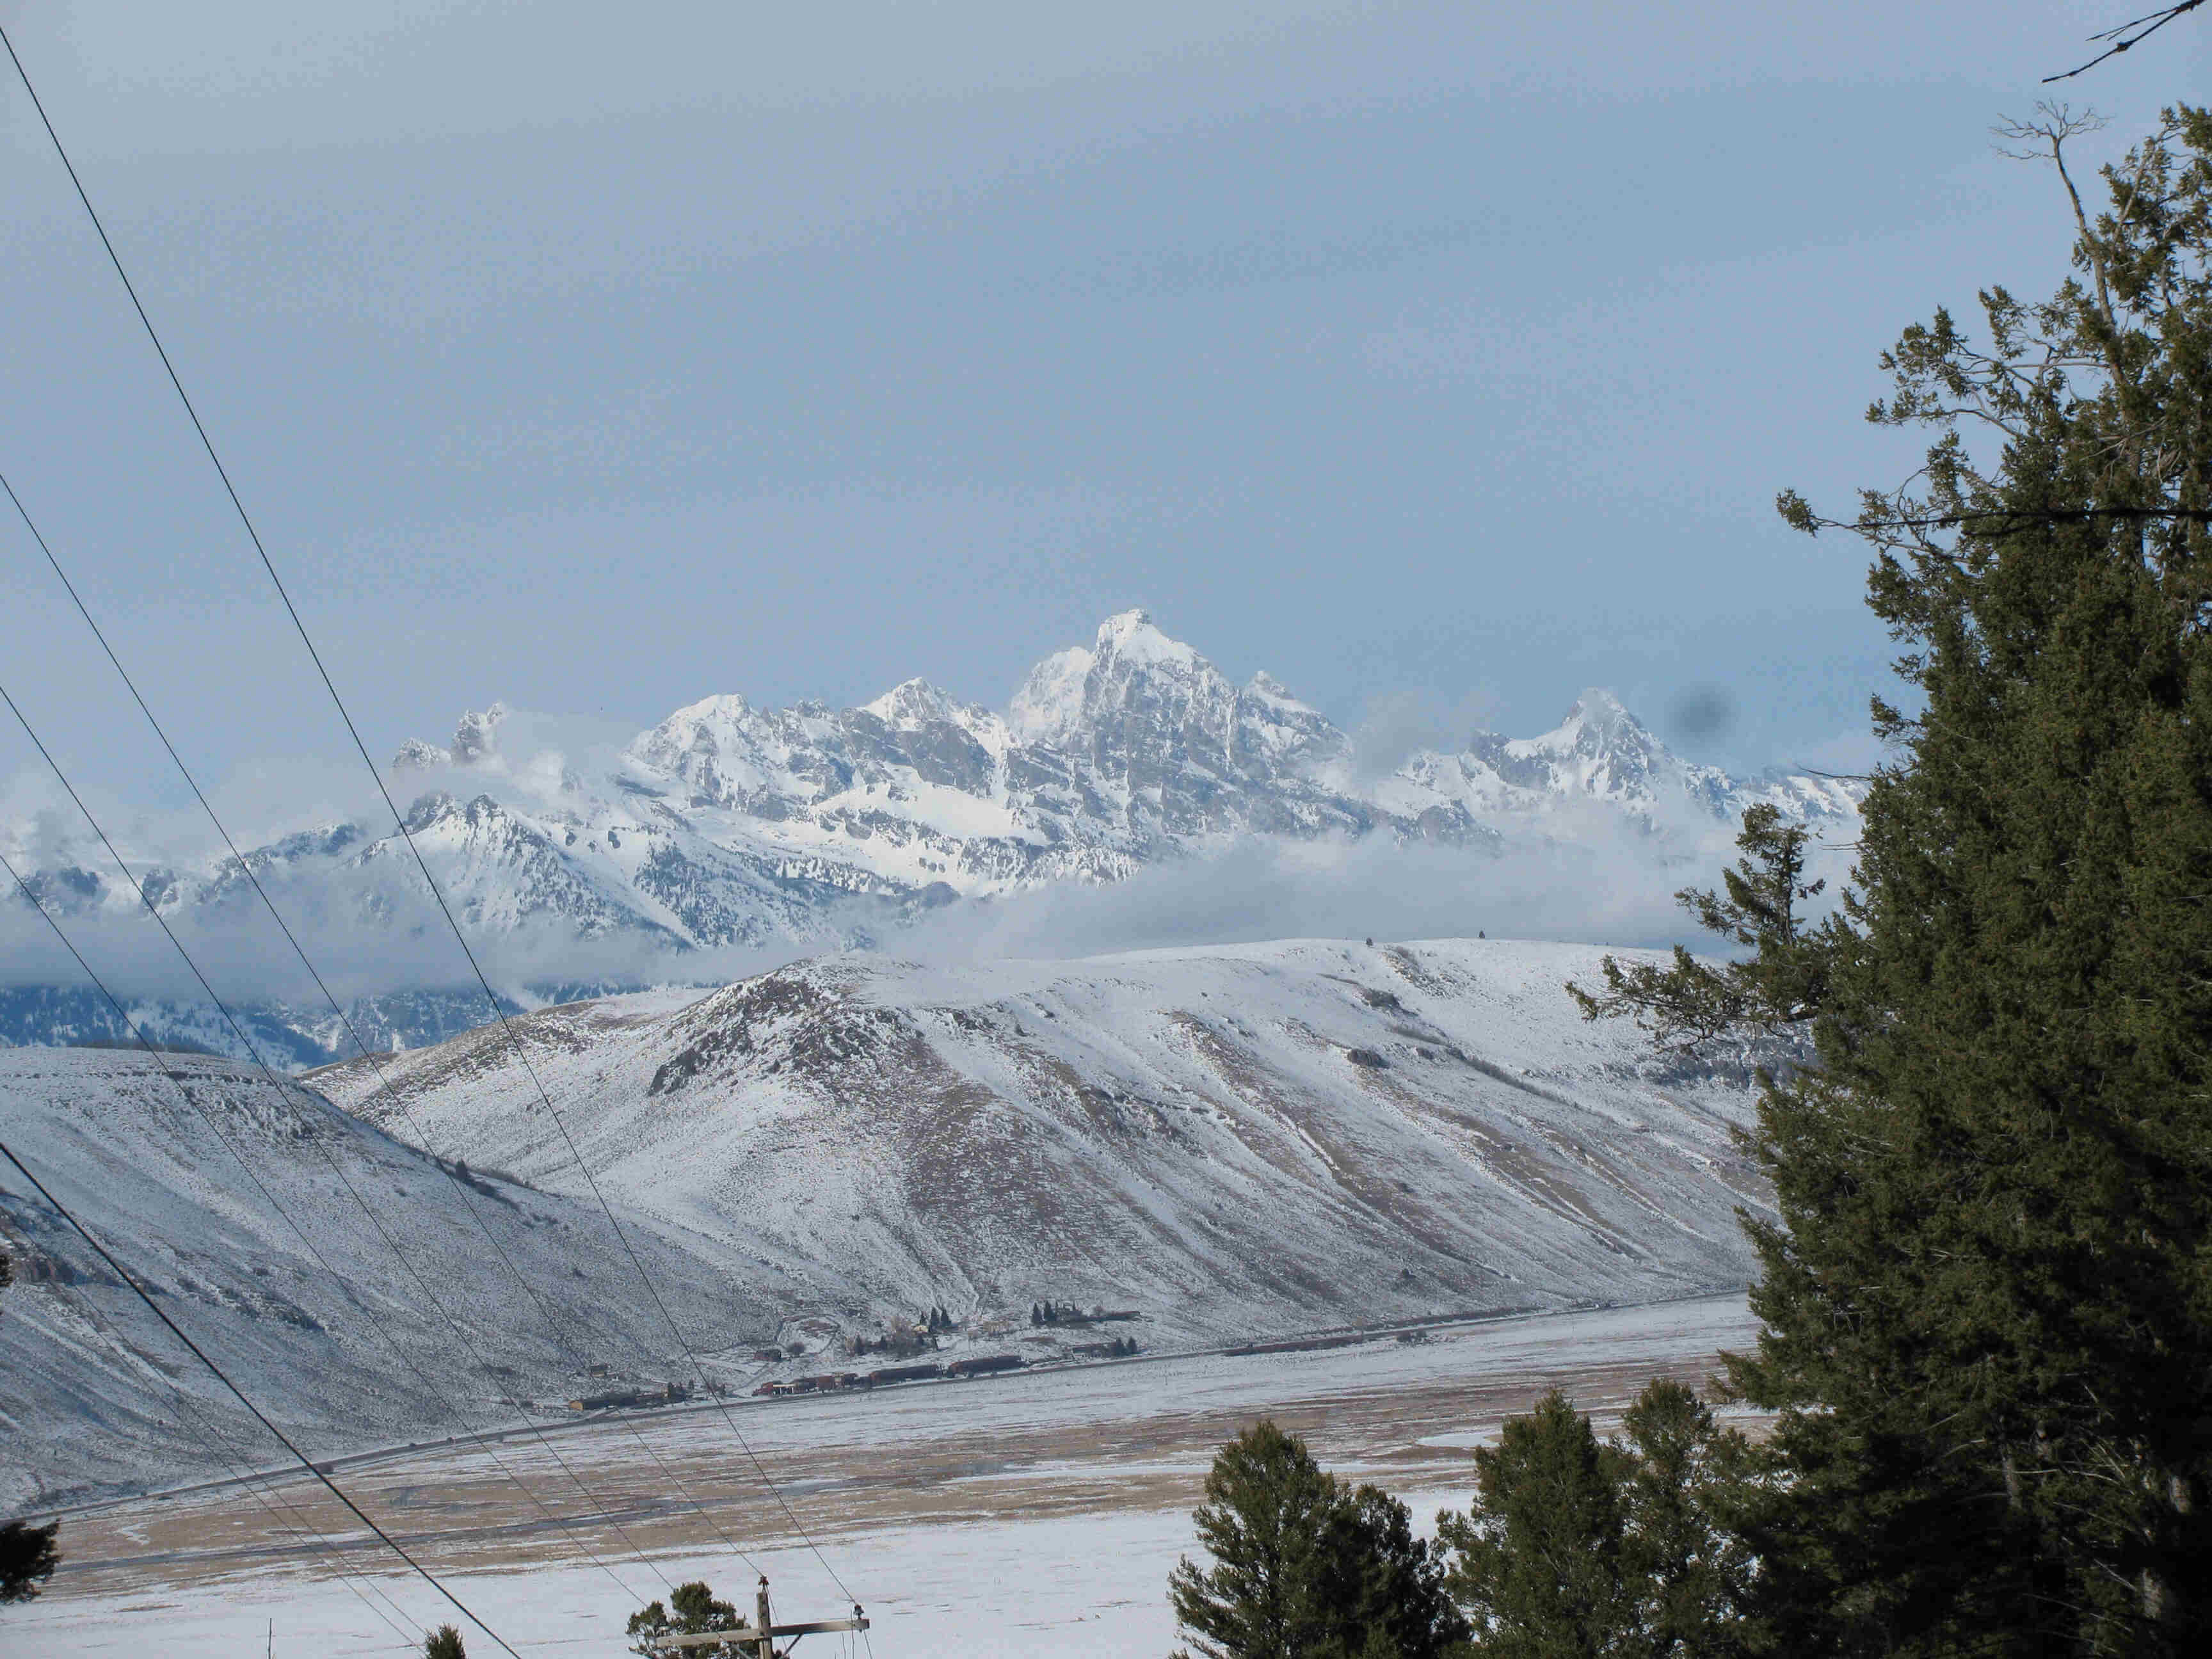 Downward view of power lines on the right and trees on the left, with snow covered mountains in the background